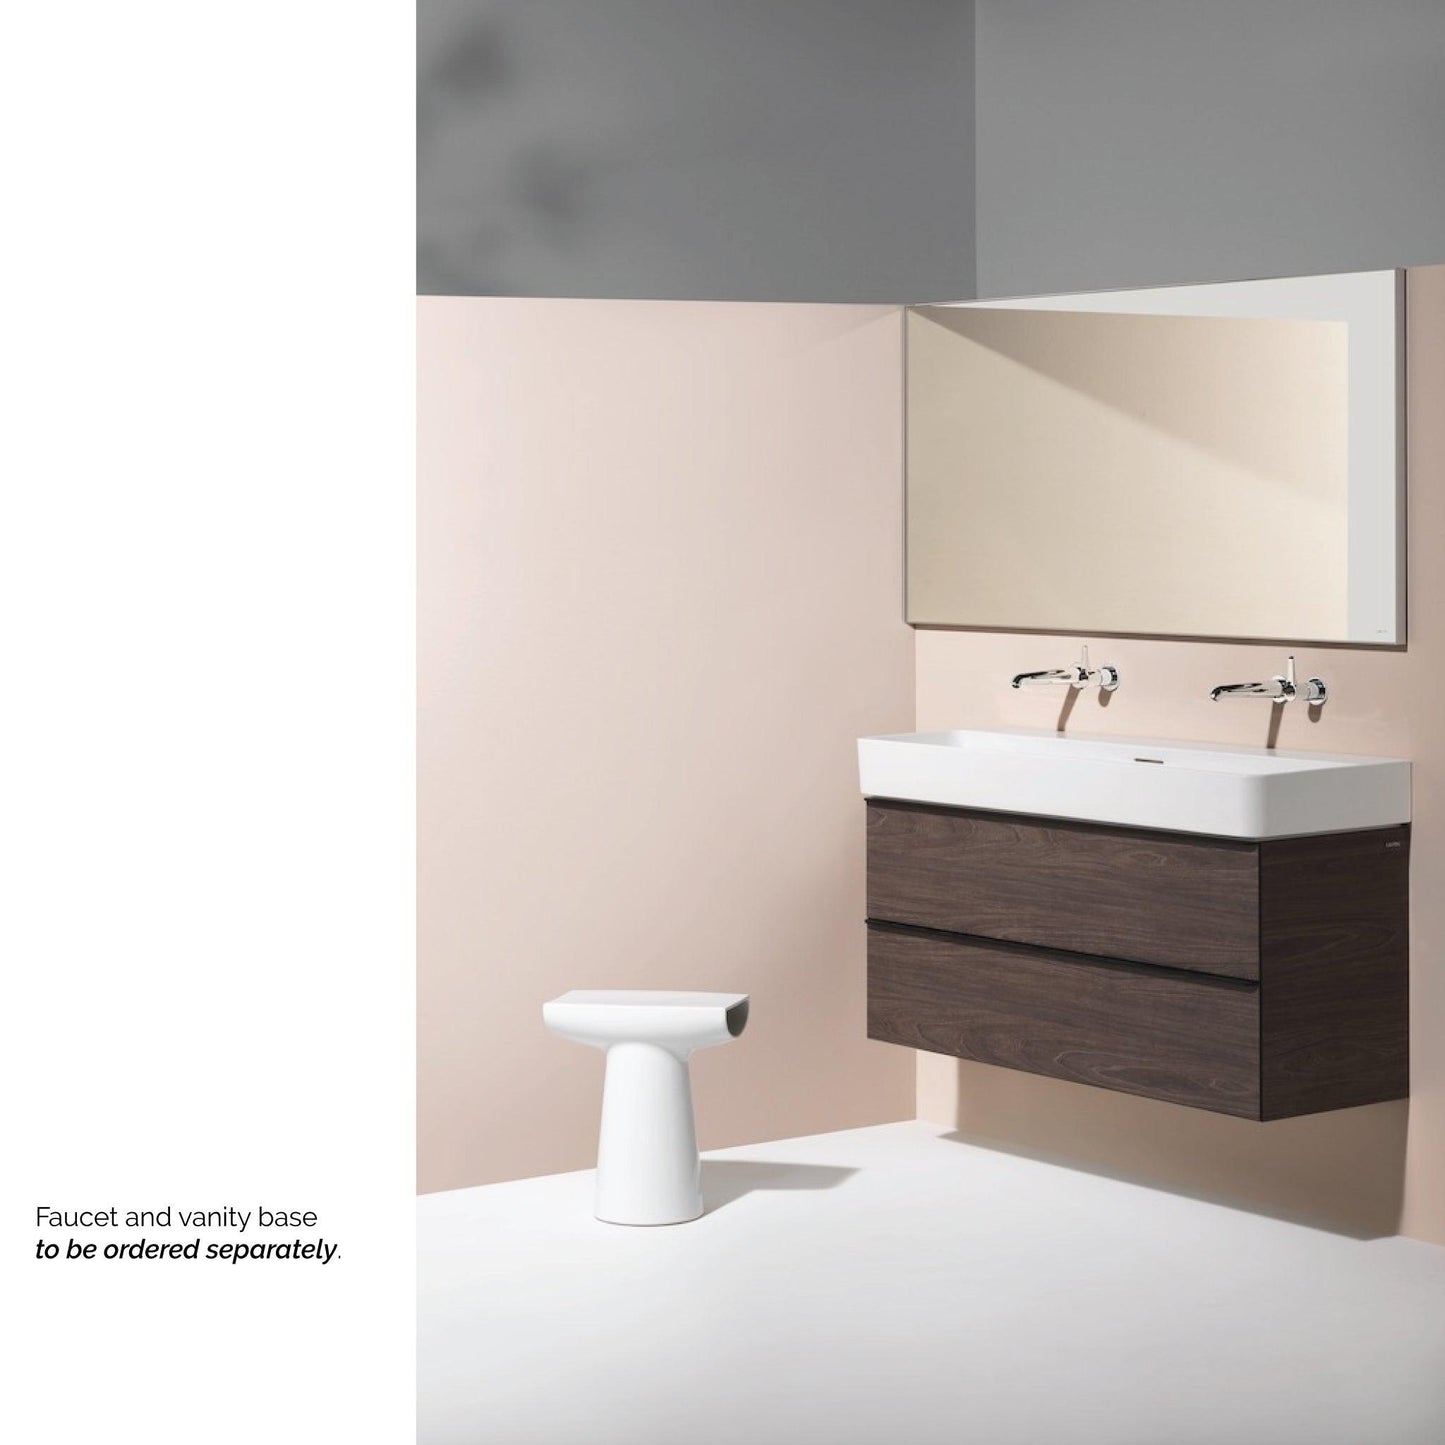 Laufen Val 47" x 17" Matte White Ceramic Wall-Mounted Bathroom Sink Without Faucet Hole